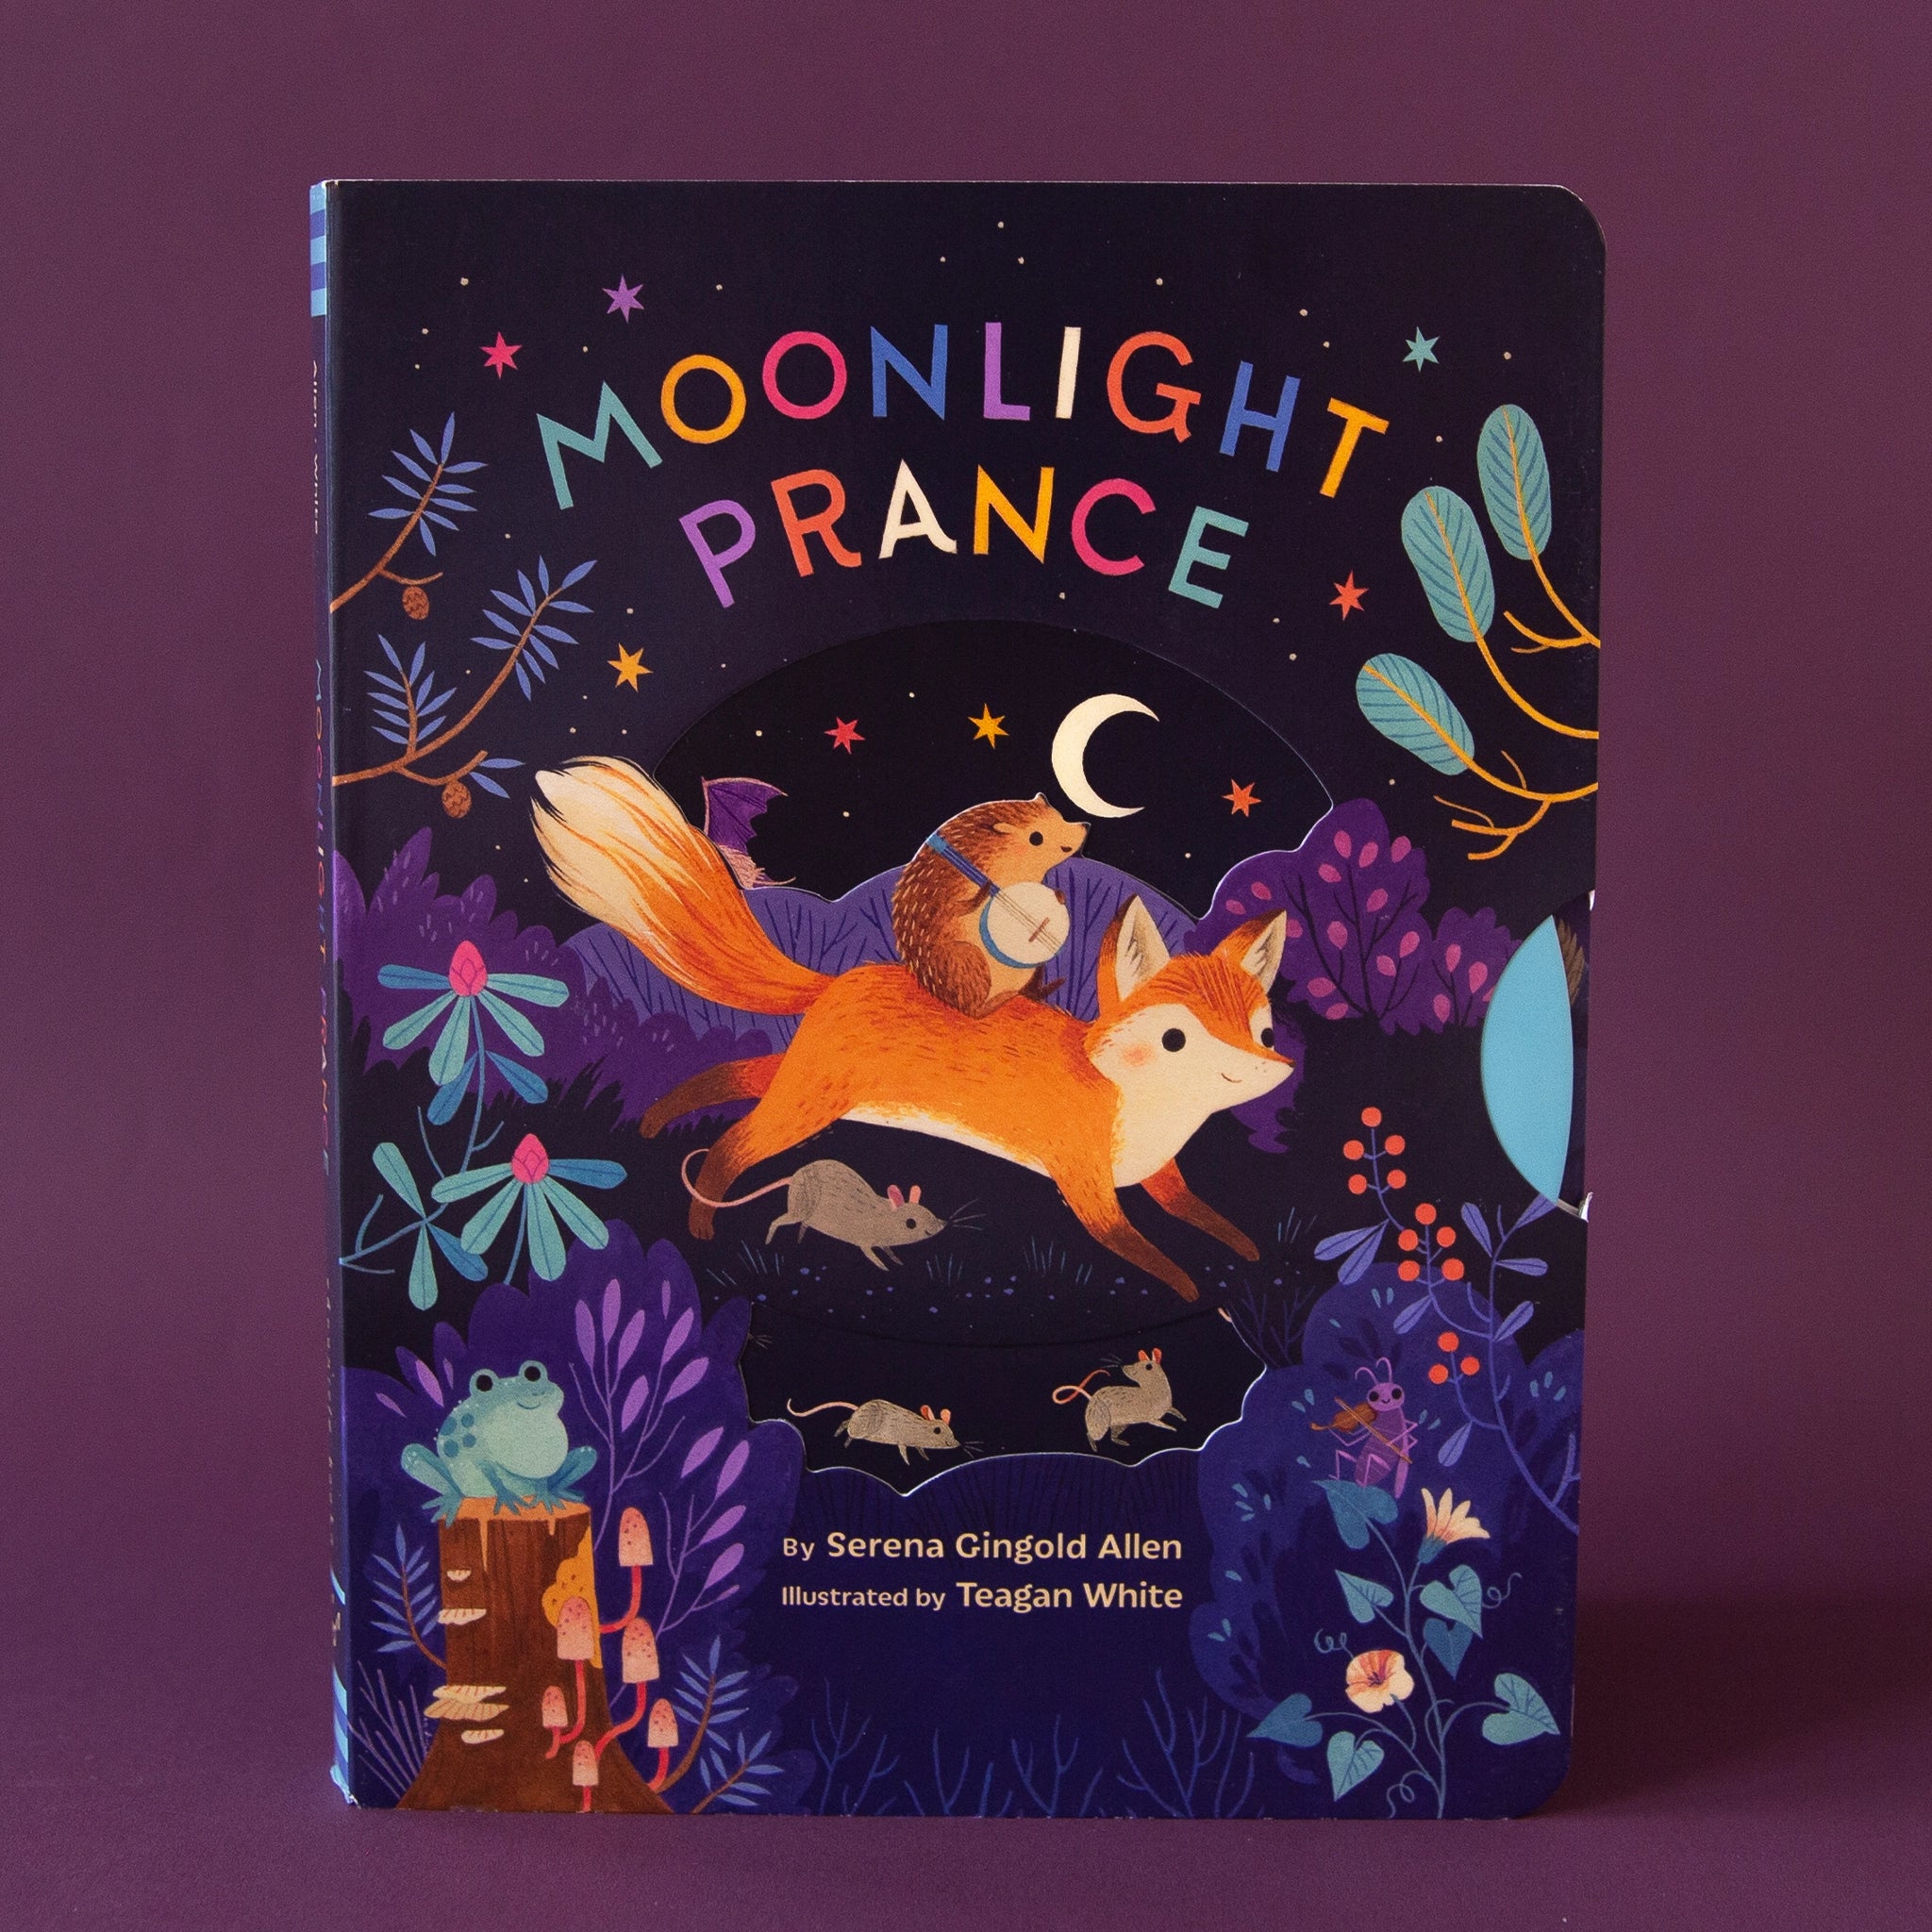 Hard cover children&#39;s book titles &#39;Moonlight Prance&#39; in colorful capital lettering. Below is a woodland scene of various animals dancing around in the moonlight. Animals include a smiling fox, banjo playing hedgehog, mice and more. The background of the cover is solid black and accented with colorful star detailing.